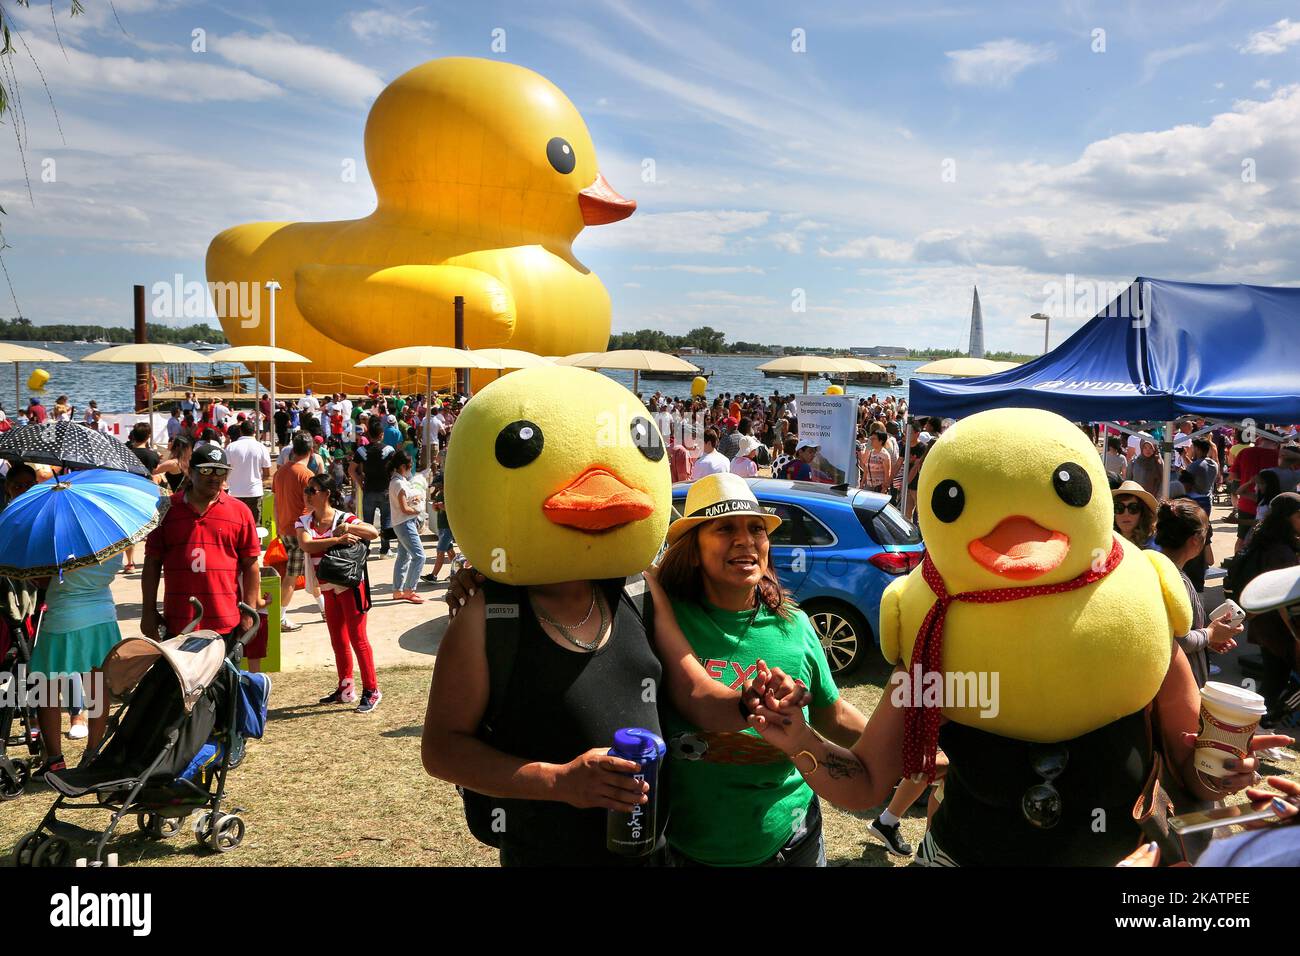 The world’s largest rubber duck arrived in Toronto, Ontario, Canada, on July 03, 2017. The giant rubber duck visited the city of Toronto as part of the Redpath Waterfront Festival. The 13,600-kg inflatable duck was created by Dutch artist Florentijn Hofman and is more than 27 meters in length and nearly six storeys tall. (Photo by Creative Touch Imaging Ltd./NurPhoto) Stock Photo